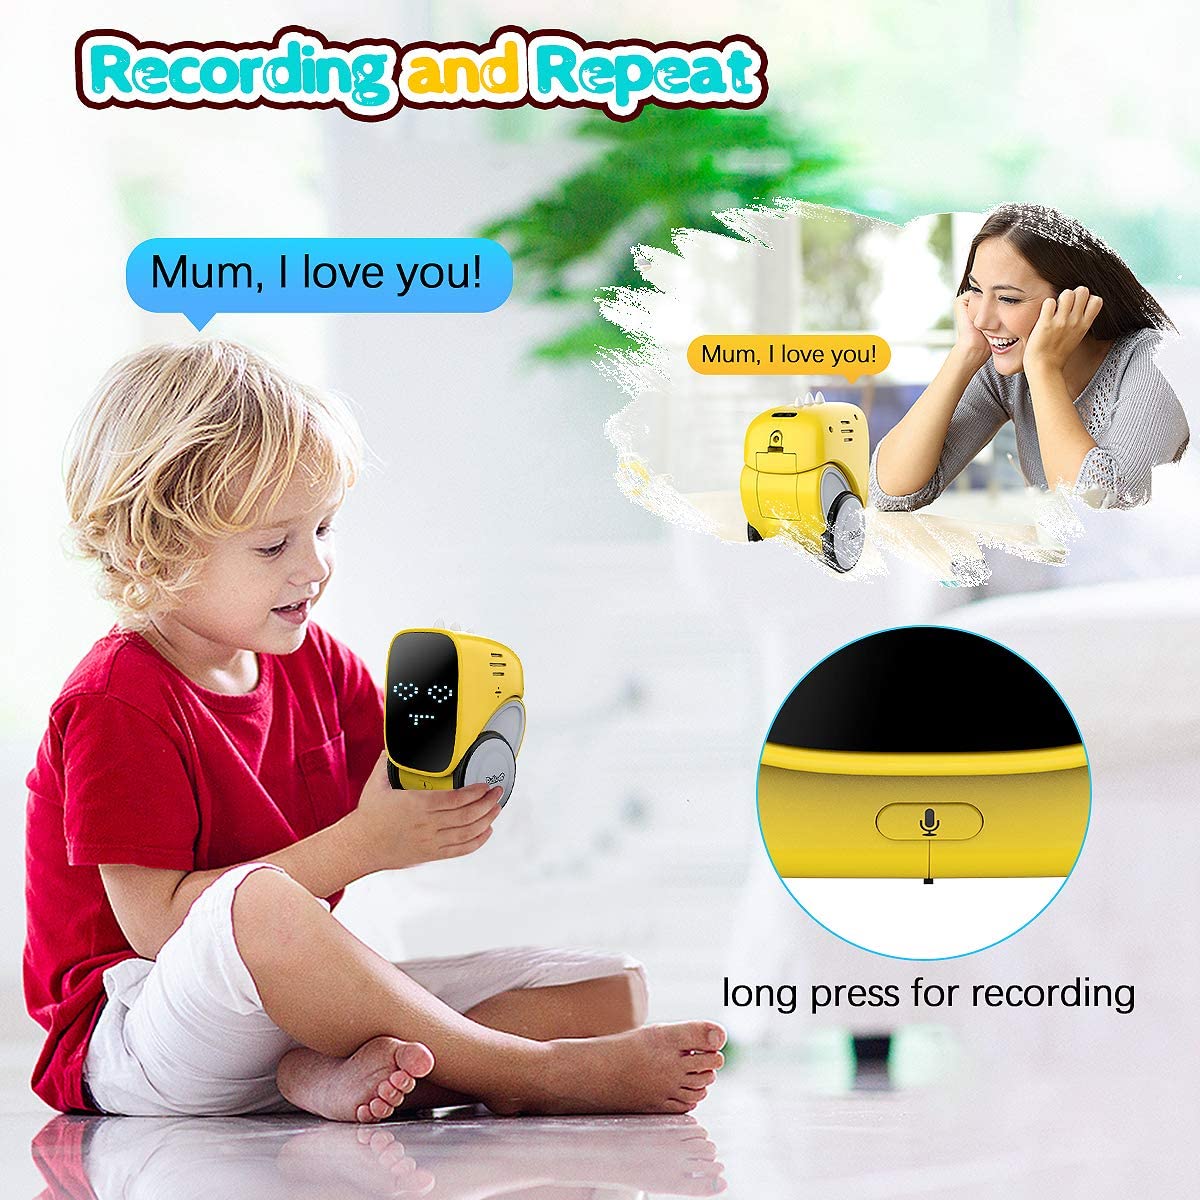 Pickwoo-Smart-Touch-Control-Robot-Singing-Dancing-Voice-Gesture-Control-Robot-Toy-1895678-4